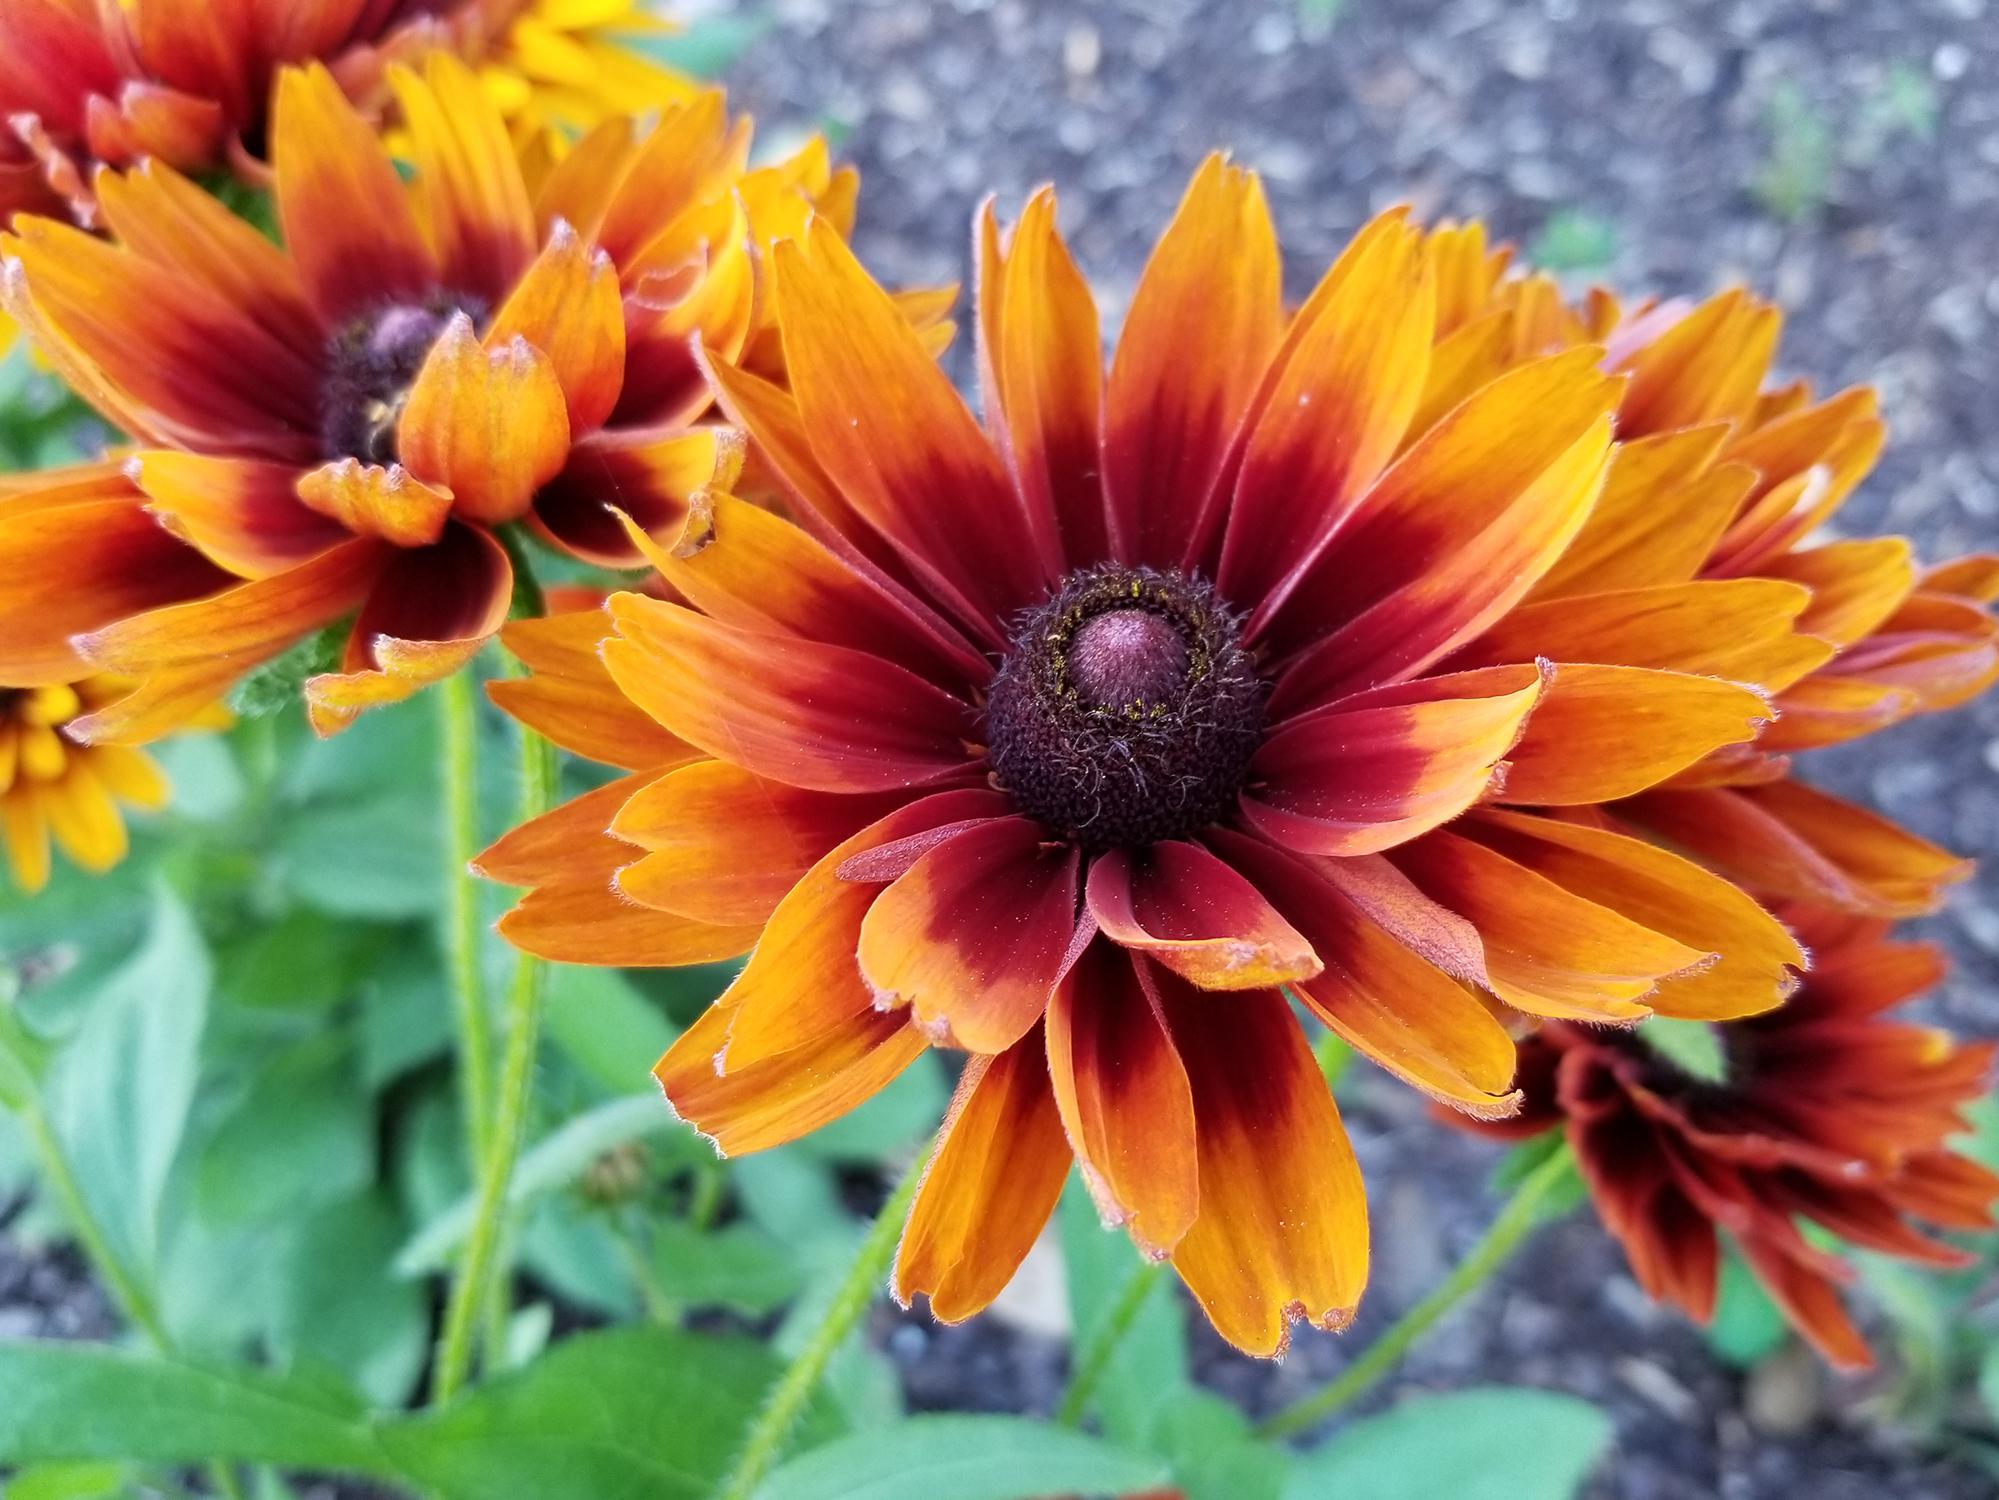 A single, large bloom in orange, red and brown commands the center of this photo, with others of similar color in the background.